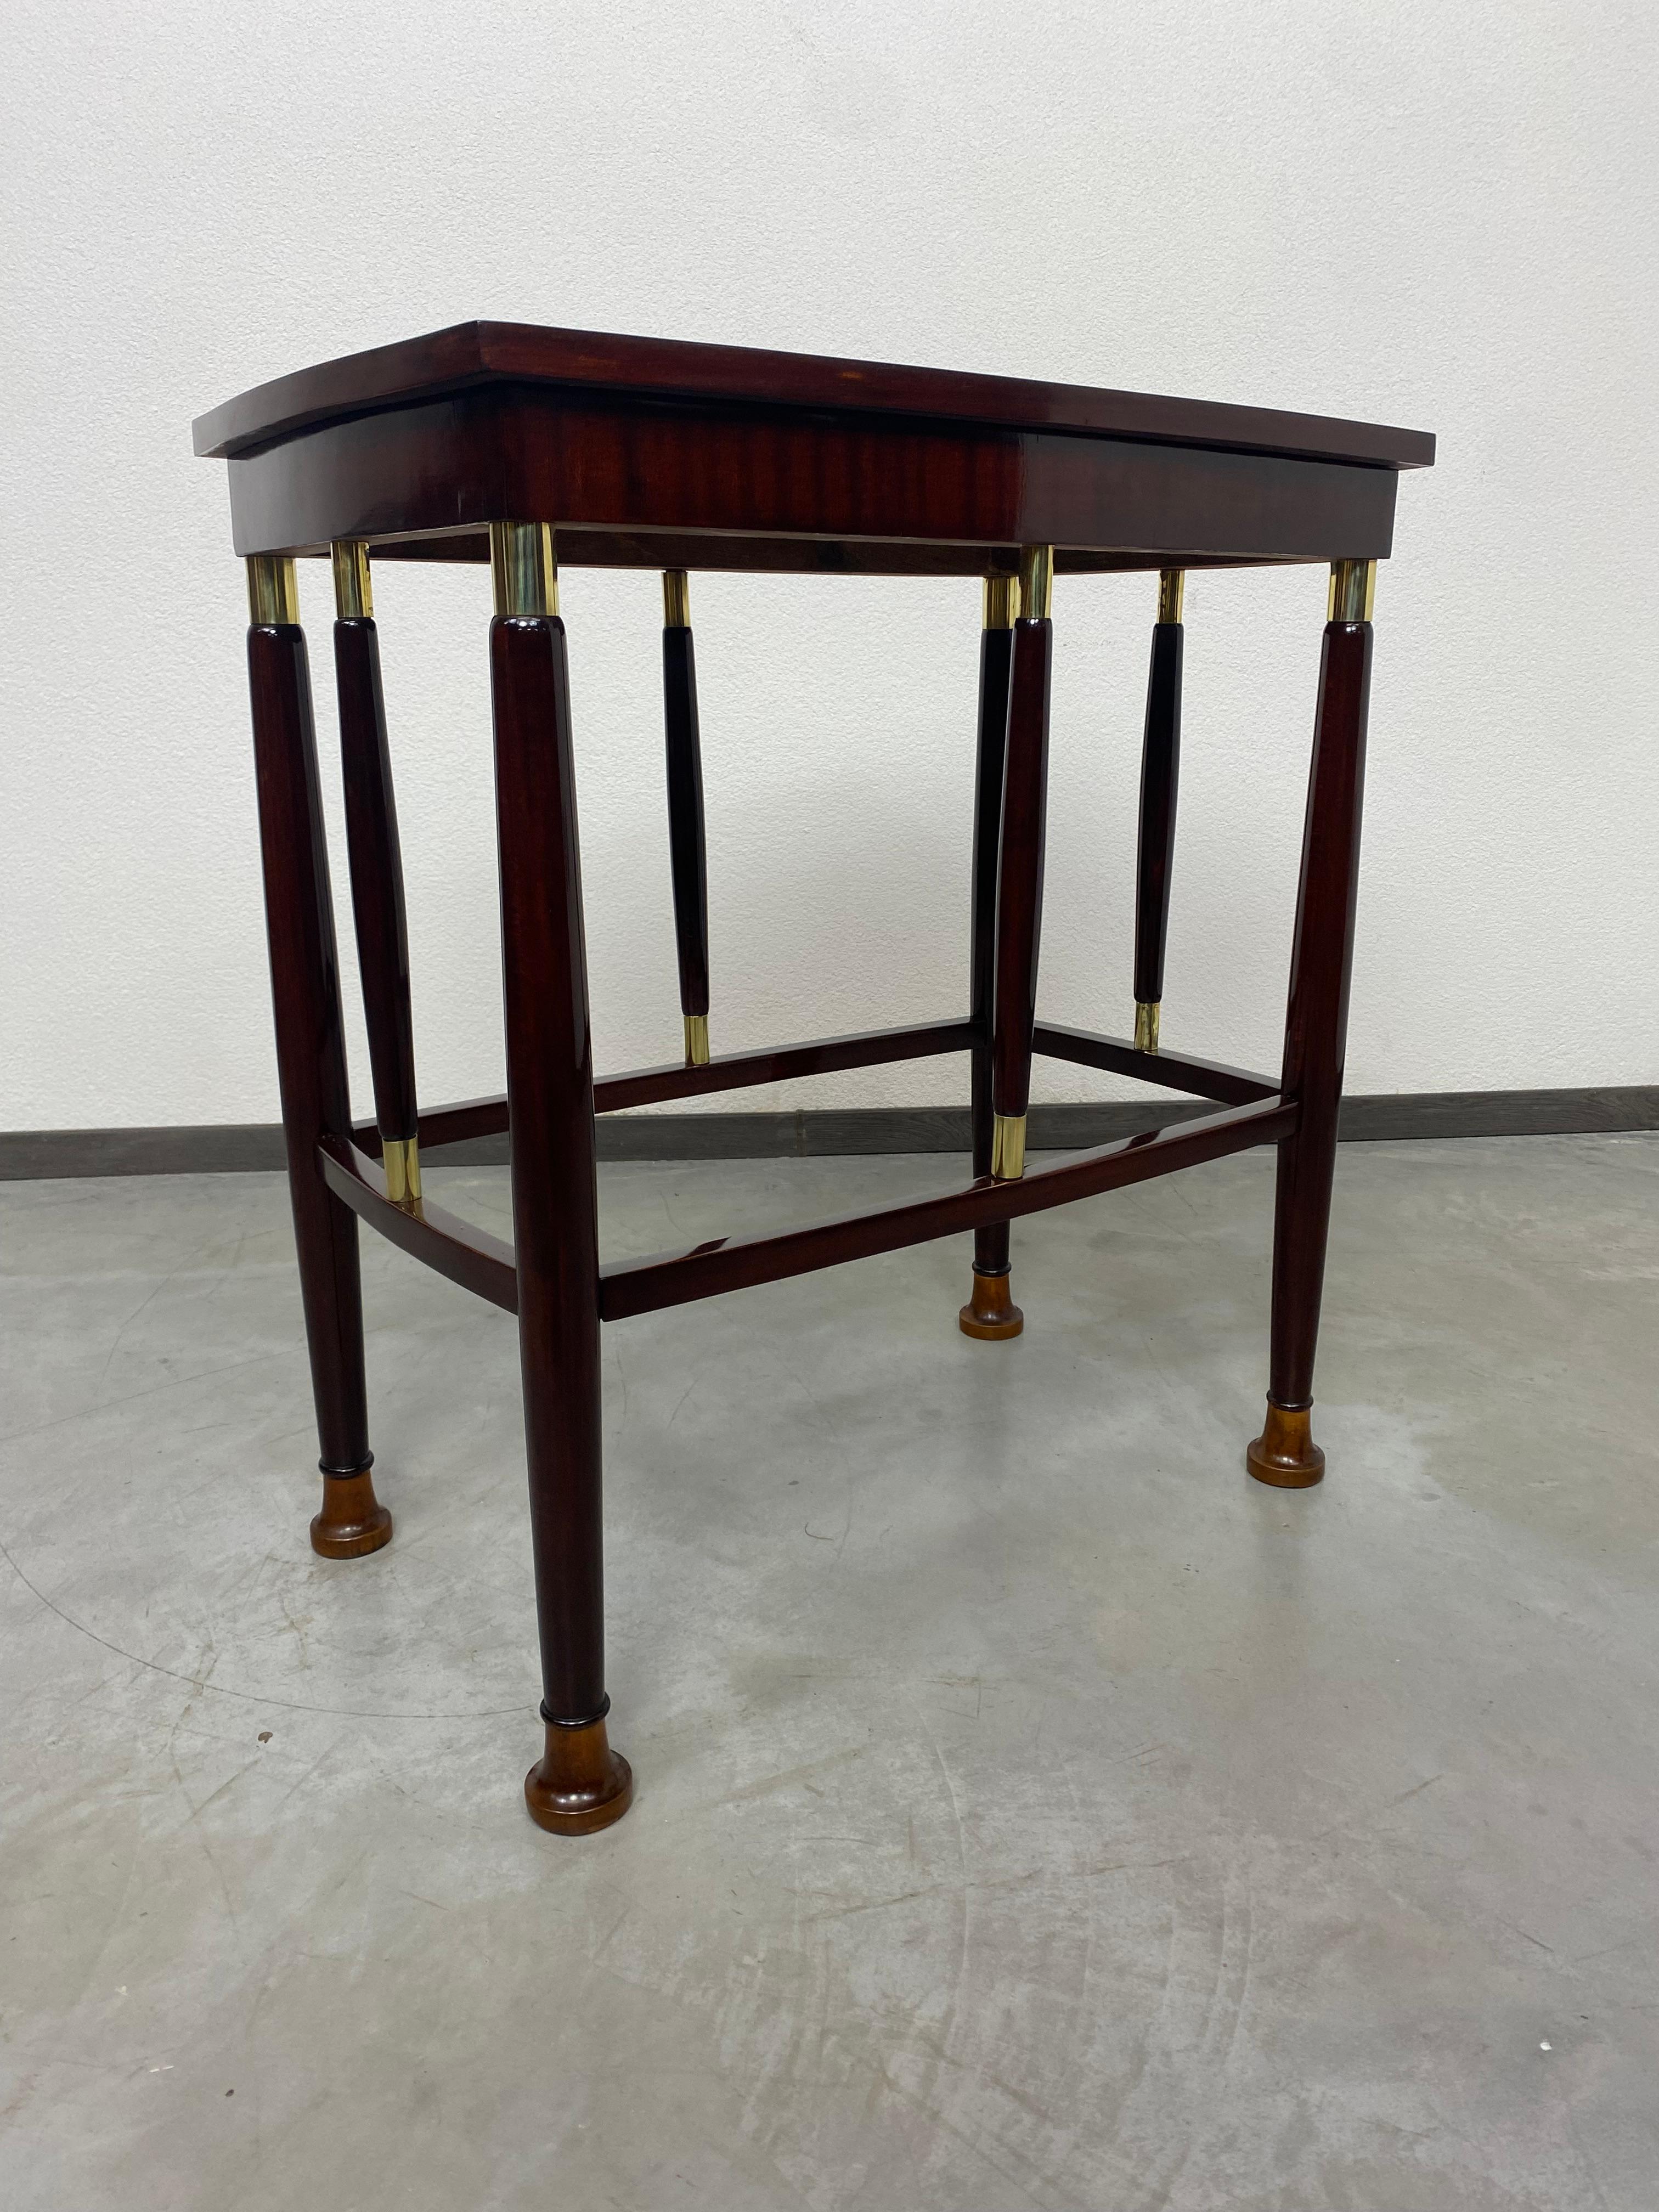 Jugendstil side table by Adolf Loos professionally stained and repolished.